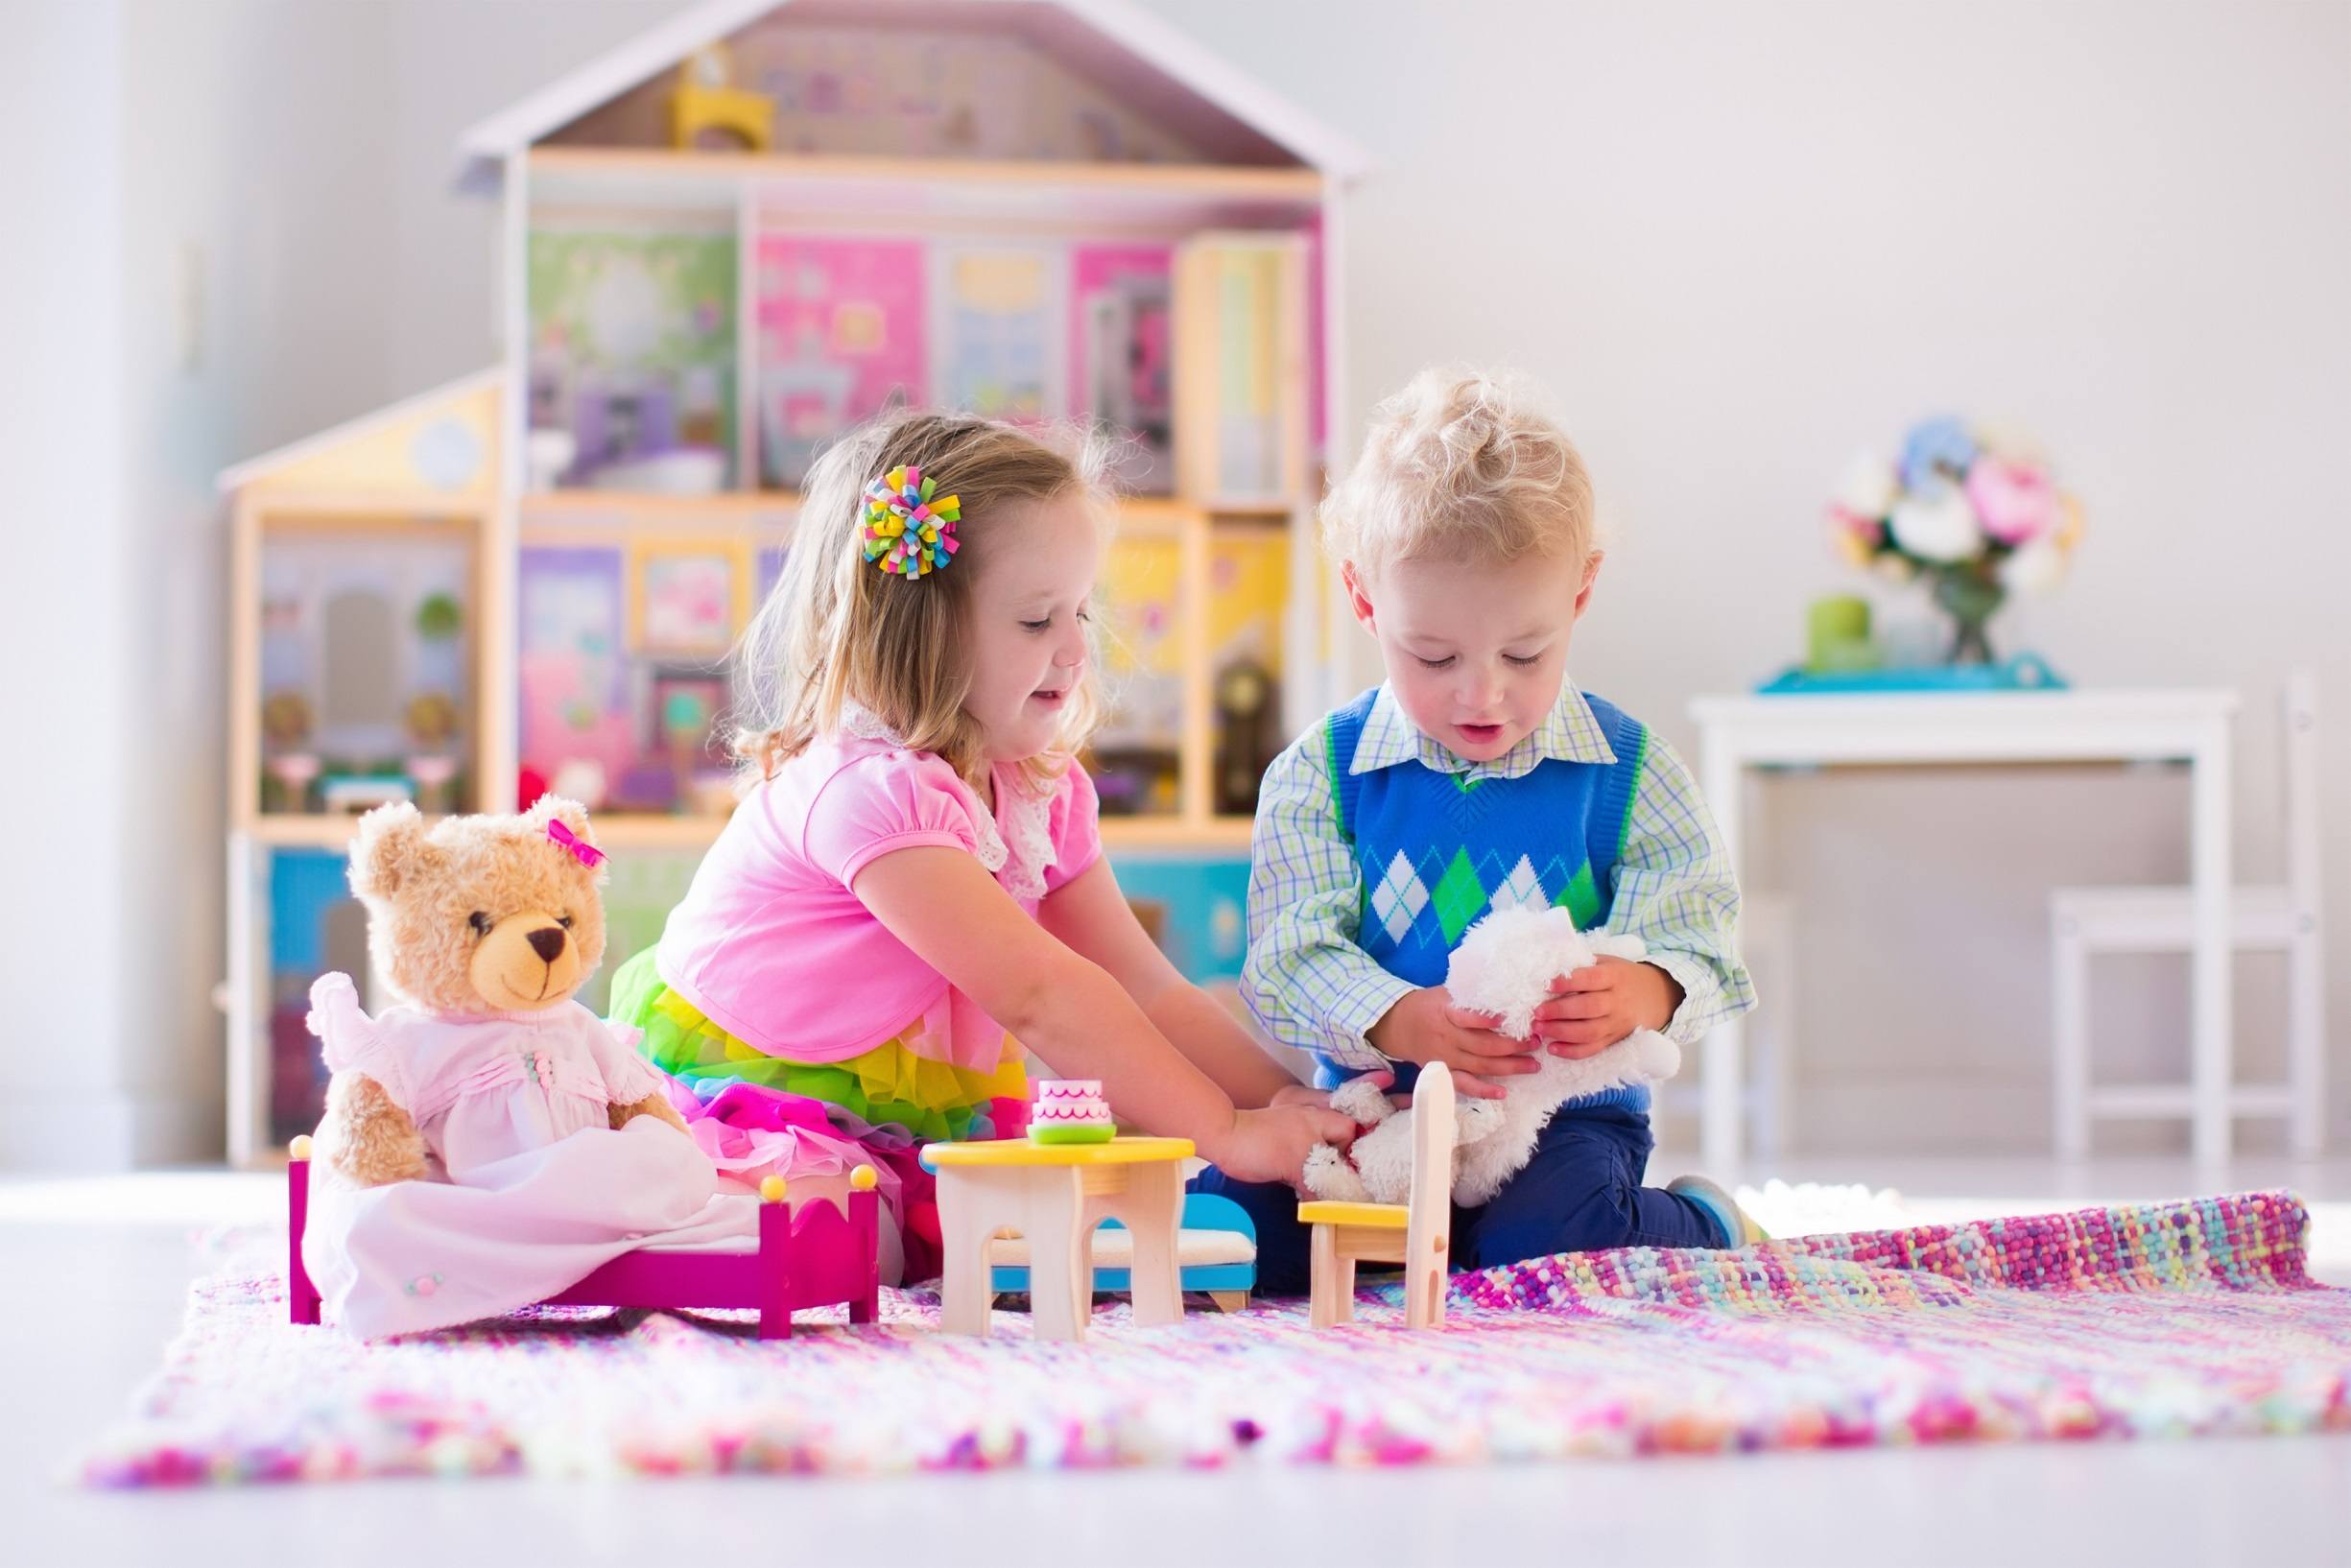 Adorable kids playing with stuffed animals and doll house